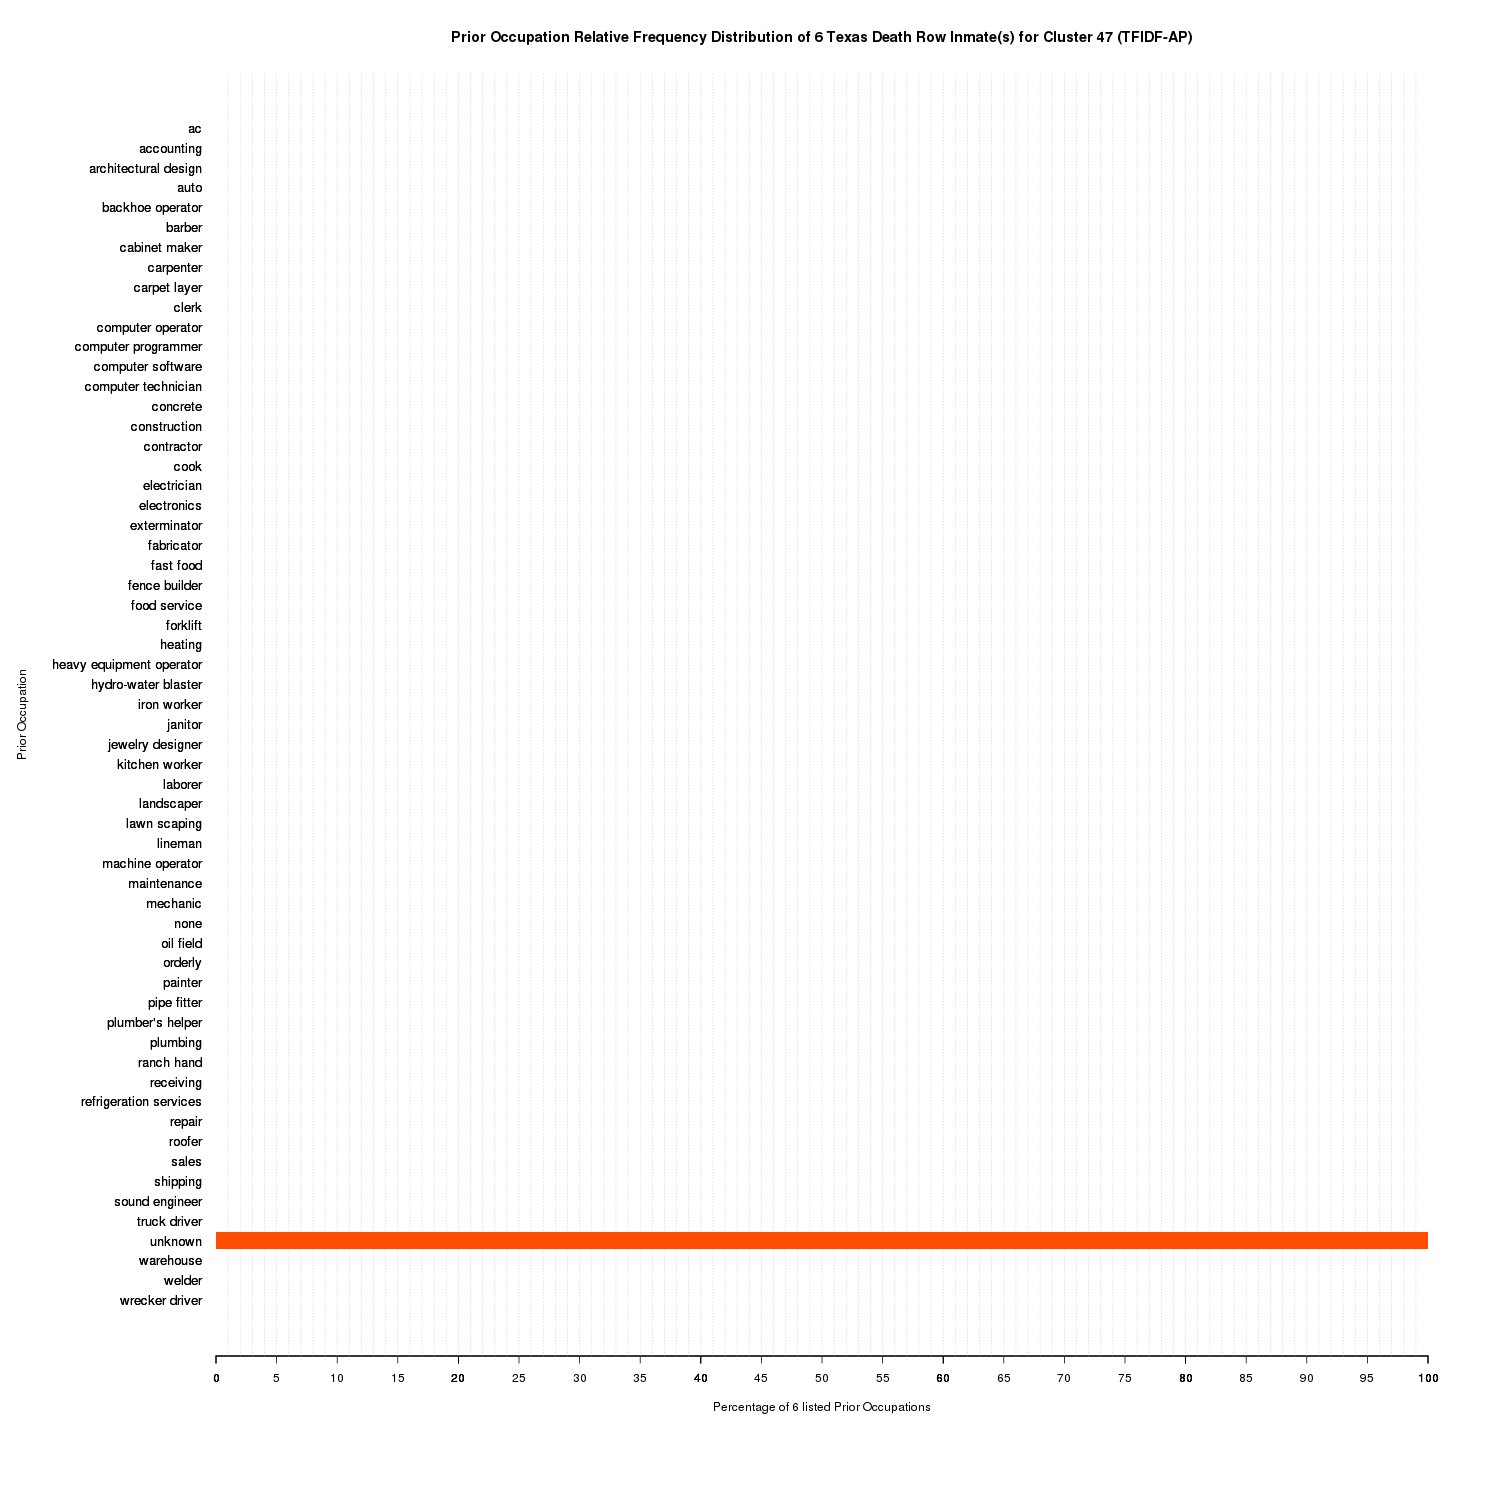 Prior Occupation Relative Frequency Distribution of 6 Texas Death Row Inmate(s) for Cluster 47 (TFIDF-AP)